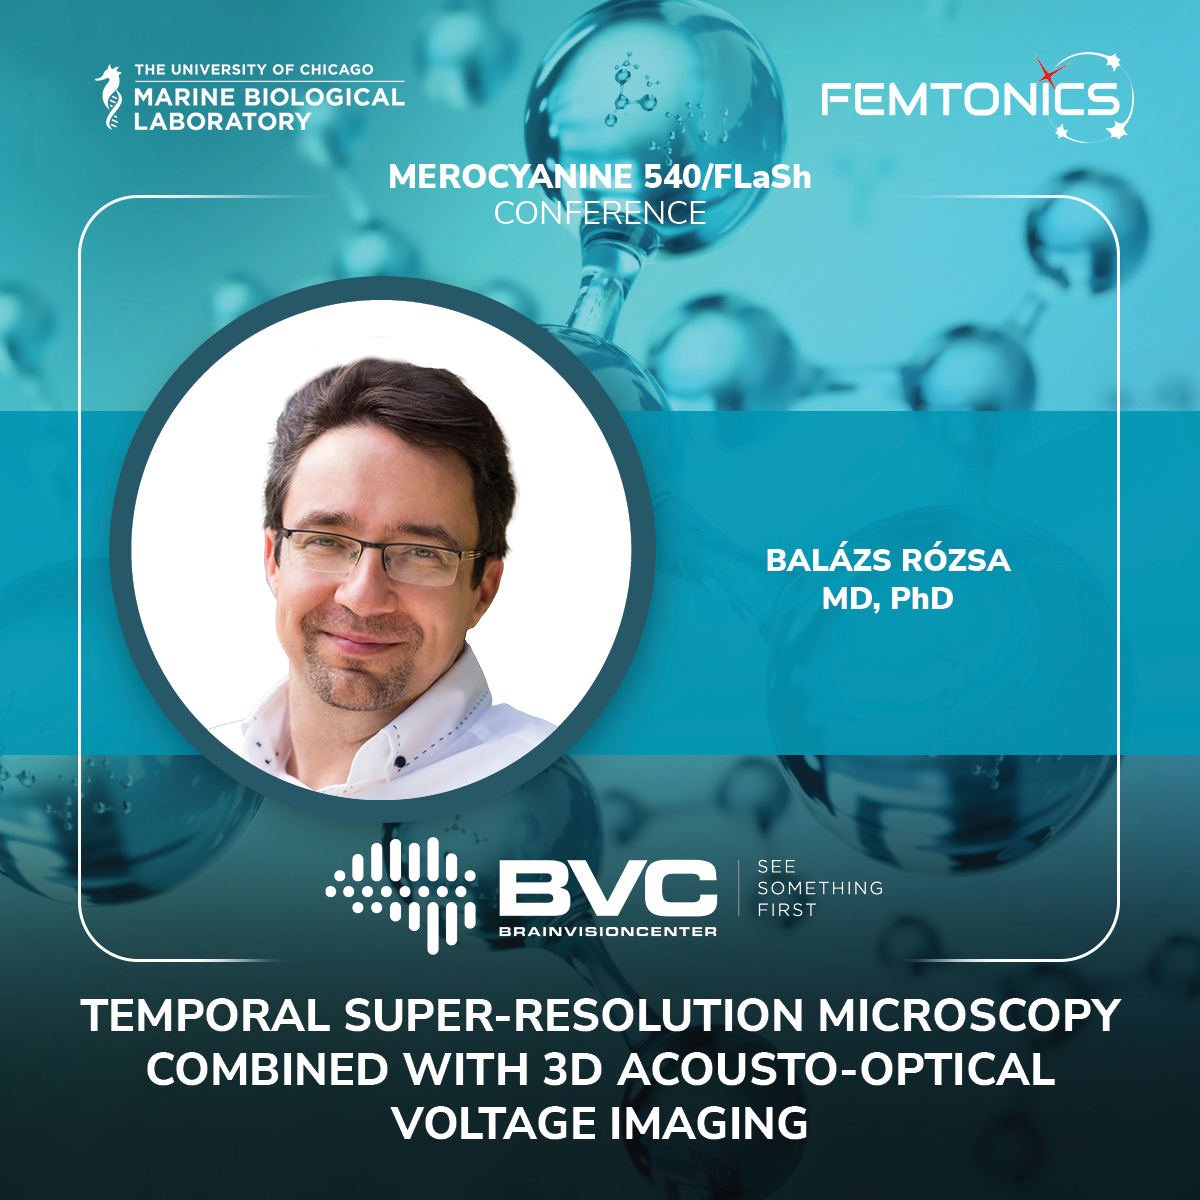 The 50th anniversary celebration of Merocyanine 540  has gathered leading professionals from the field of #voltageimaging: their thought-provoking talks, such as the one by Balázs Rózsa MD, PhD, sparked avid discussion & paved the way for promising collaborations! #neuroscience